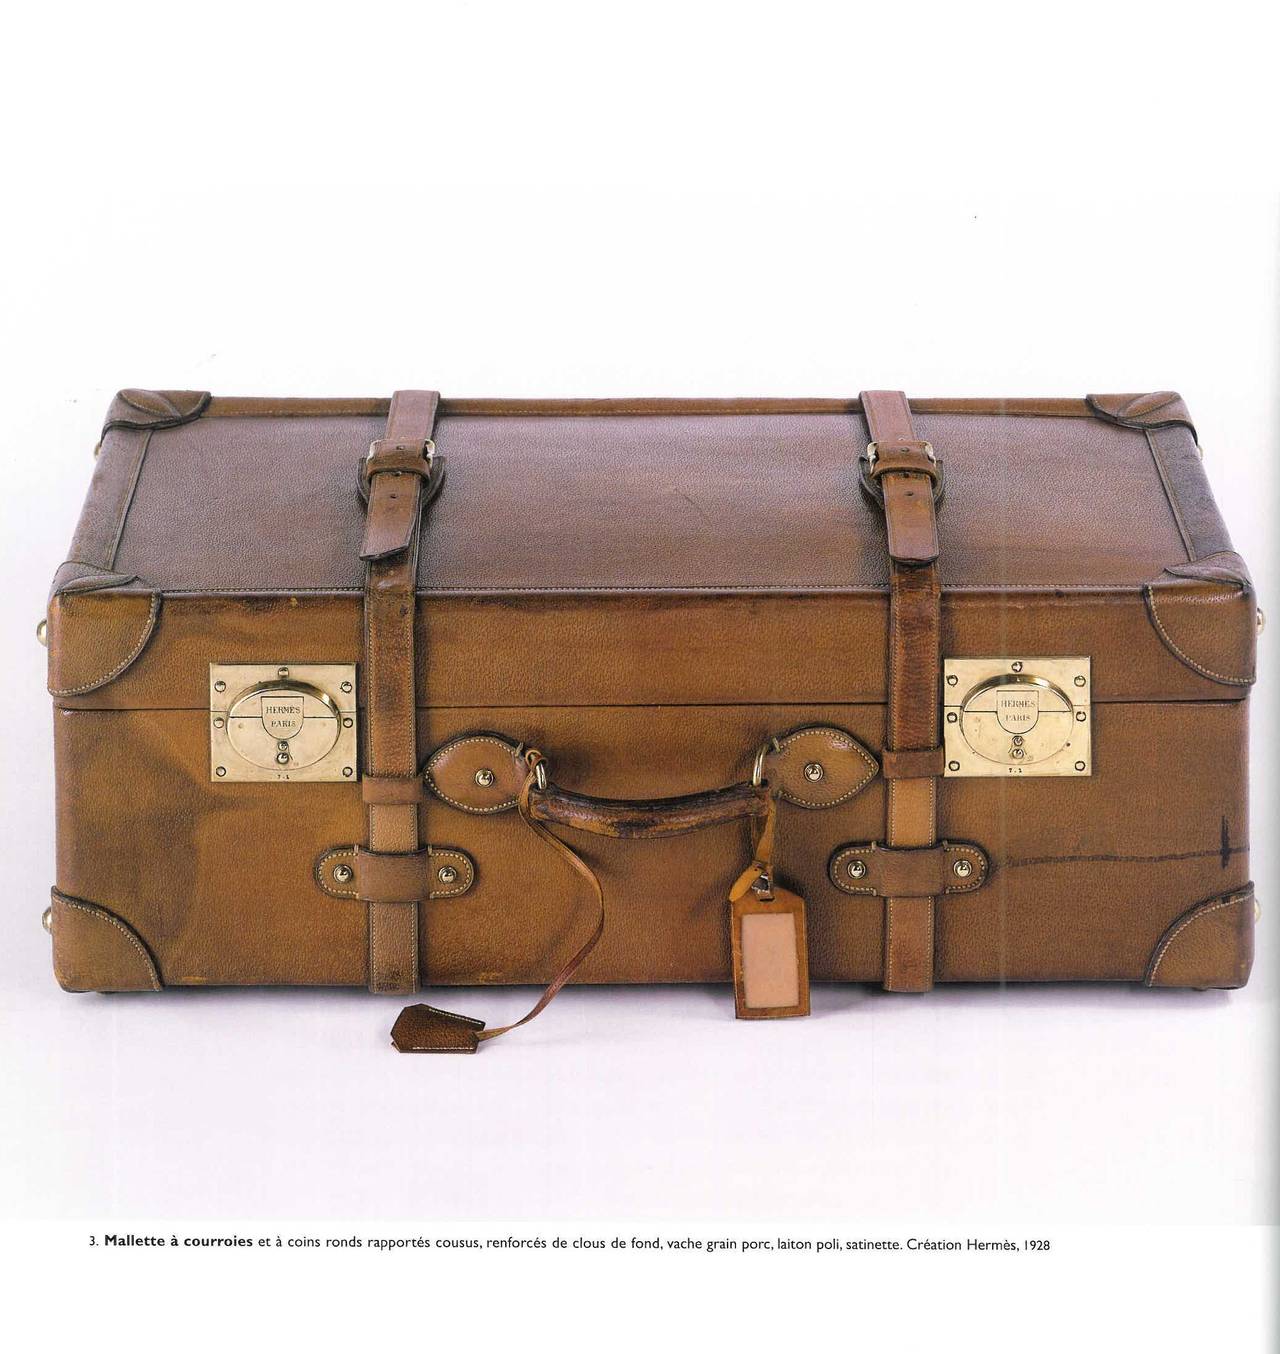 This beautifully presented book illustrates the collection of luxurious travel objects made by the world-famous brand 